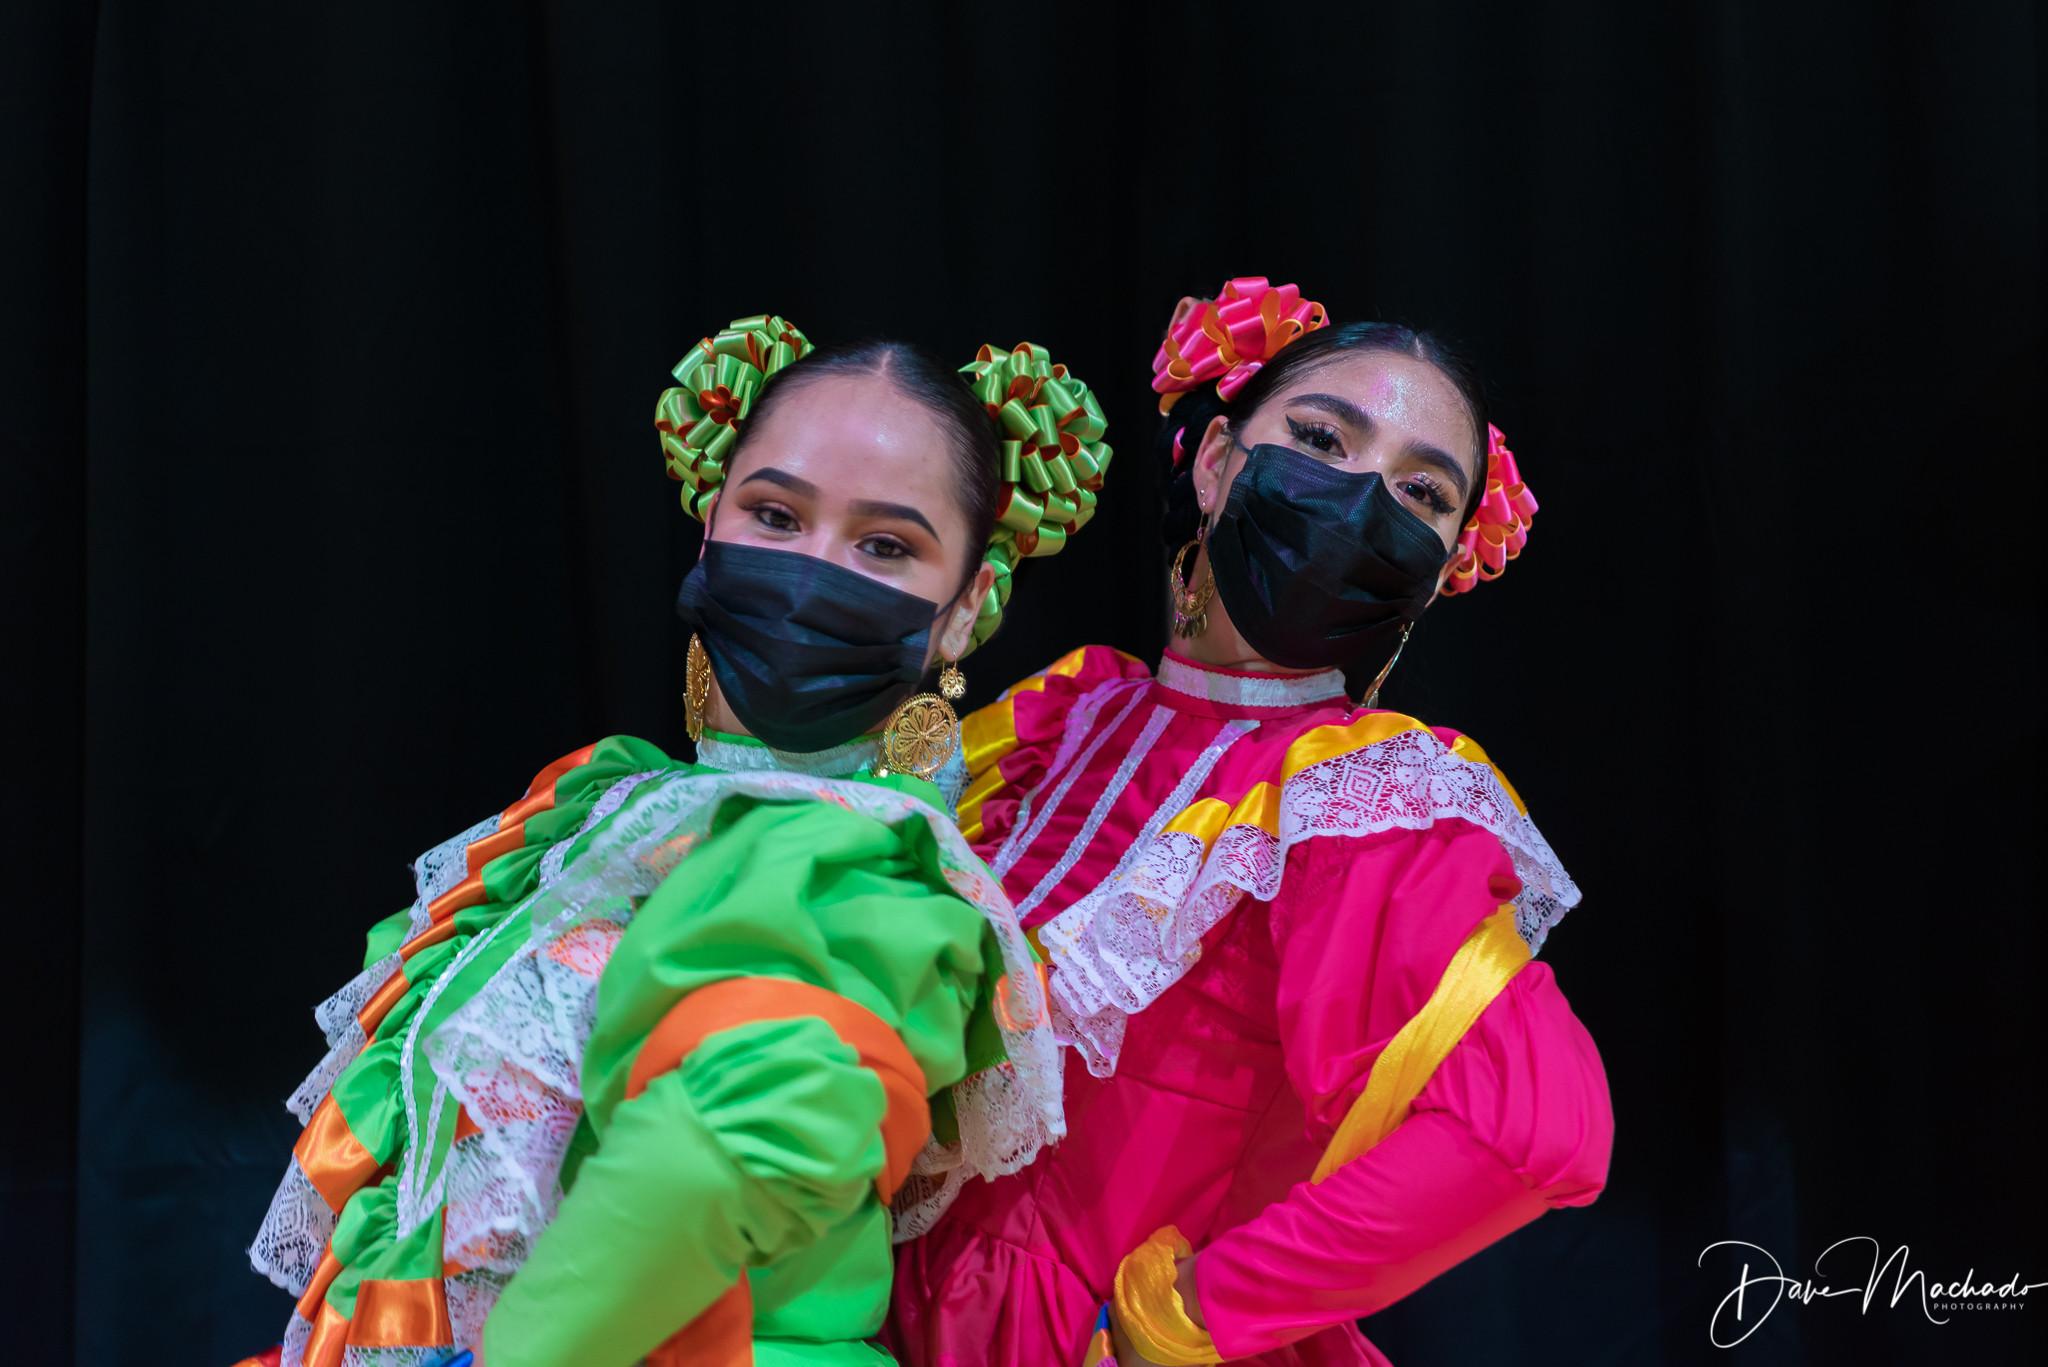 Two dancers perform at Festival Latinx